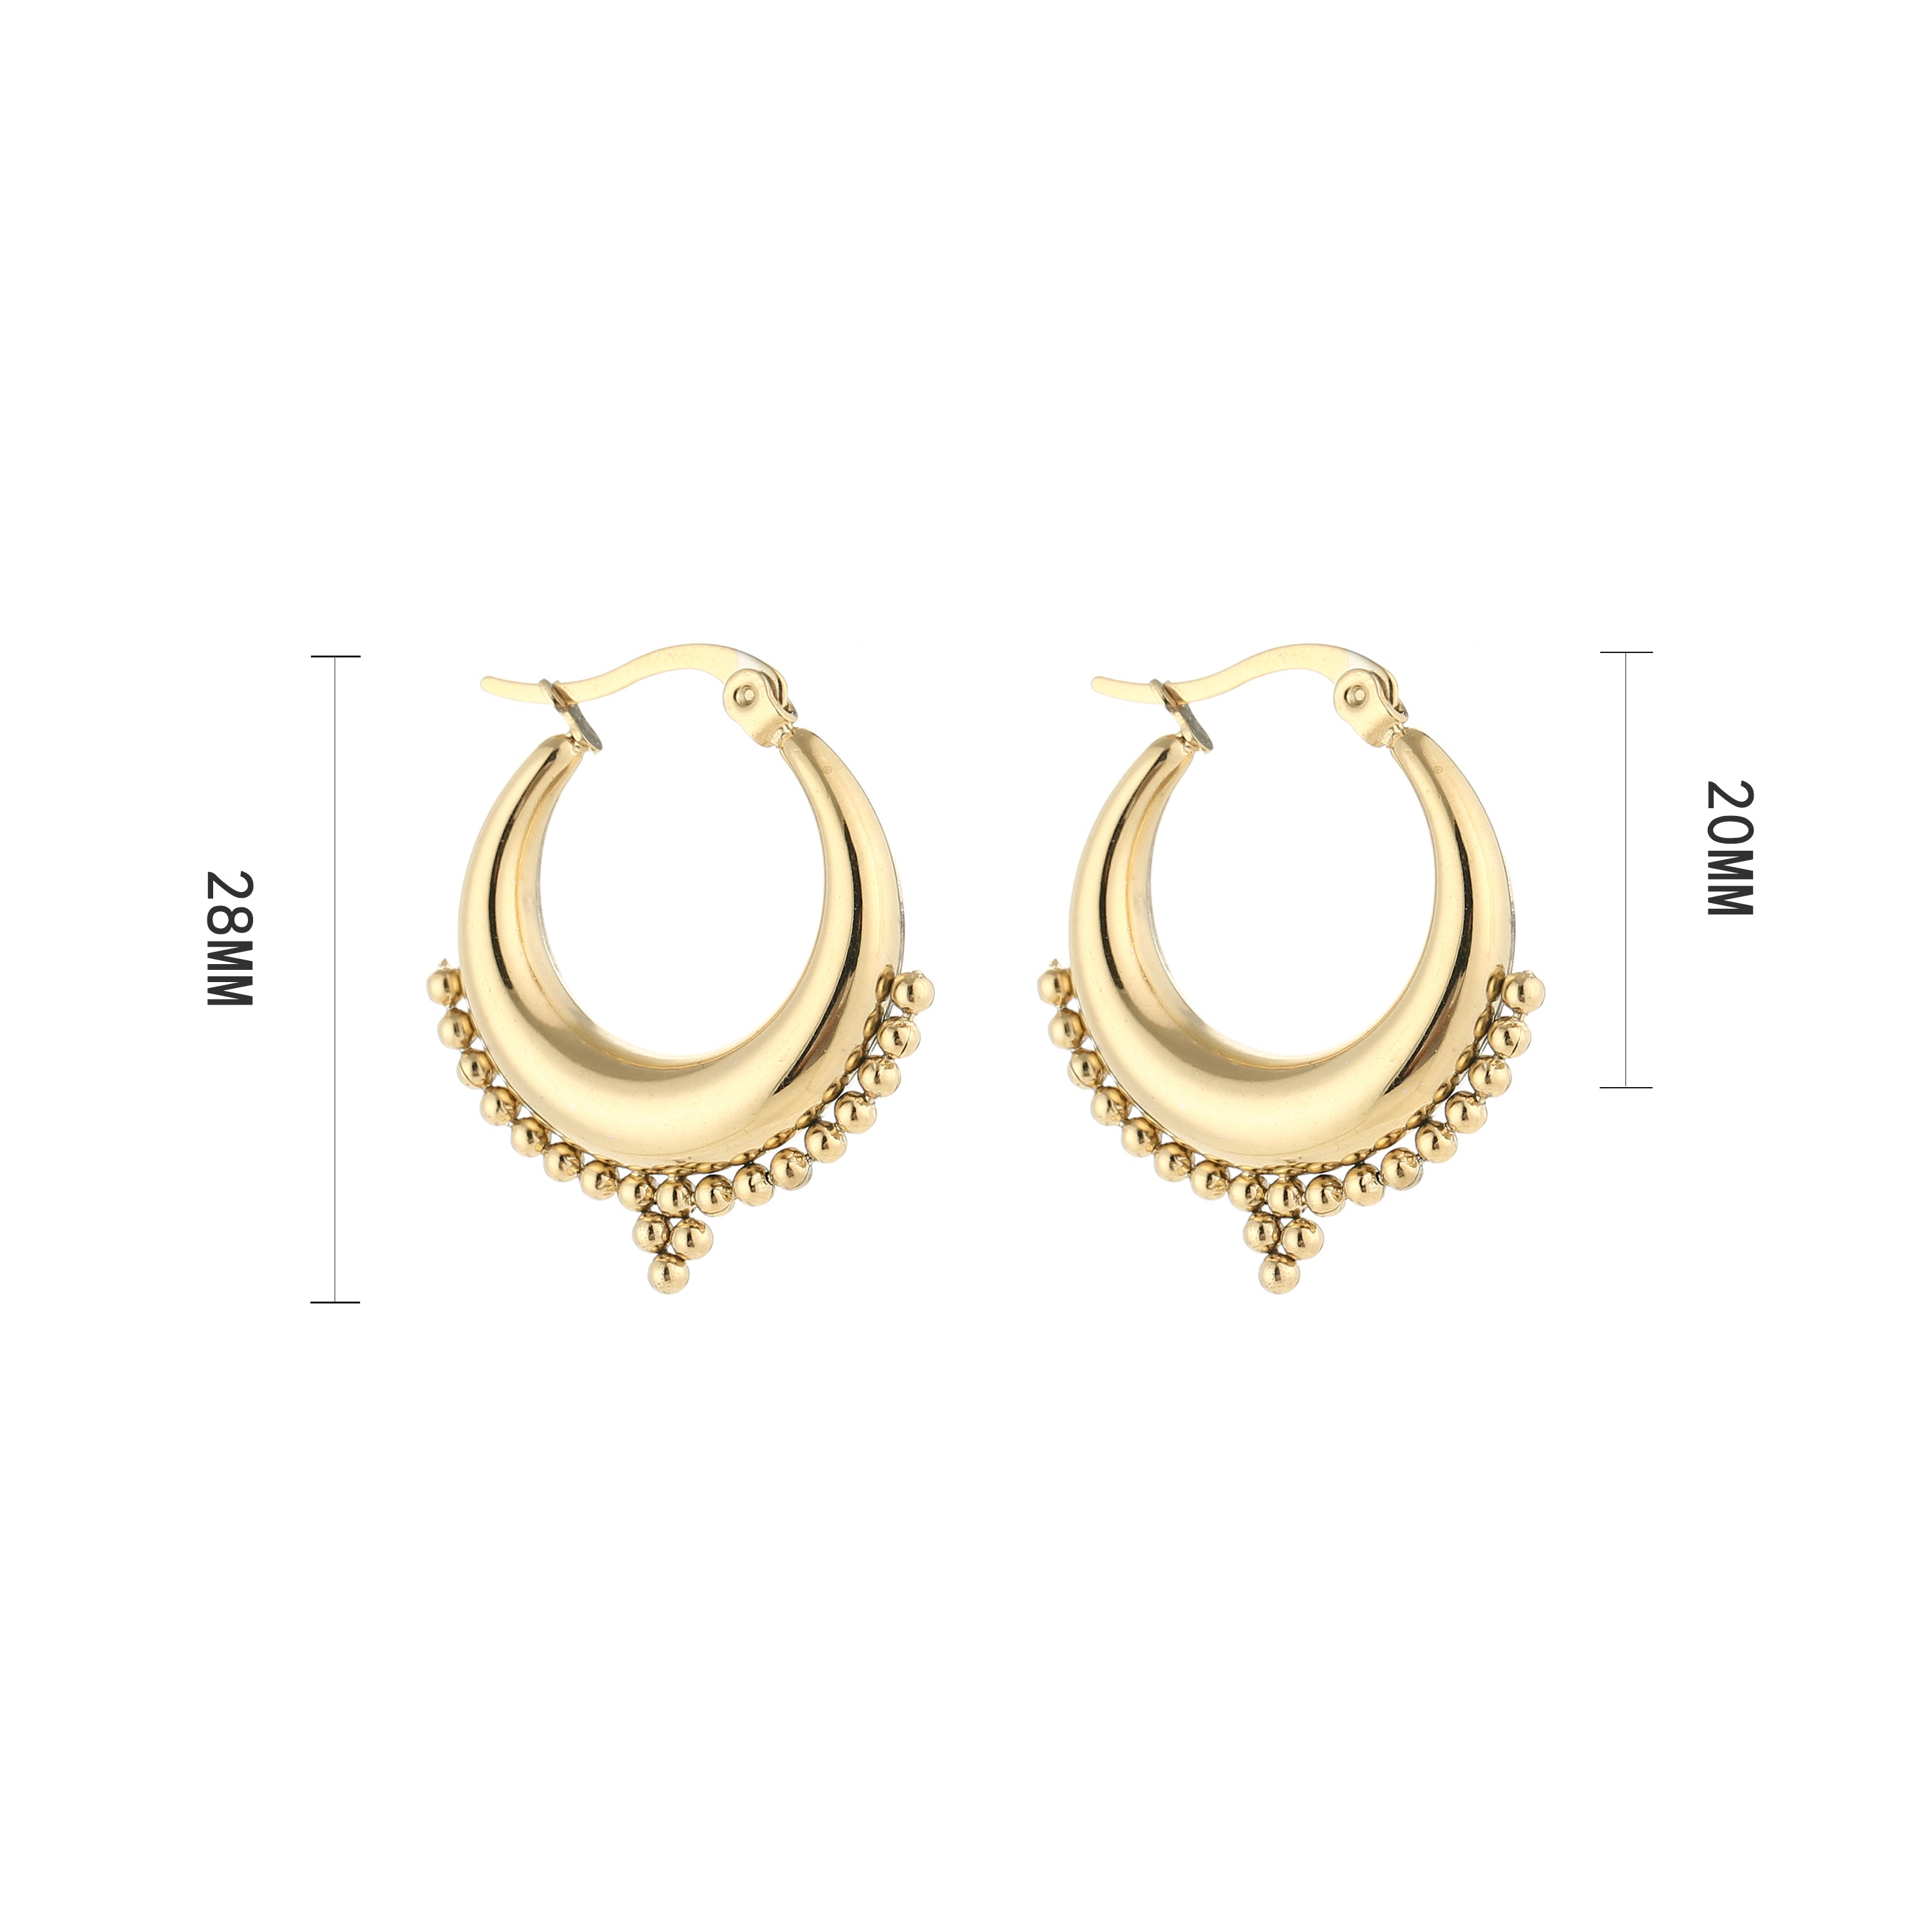 ♥︎INDIA HOOPS - My Favourites